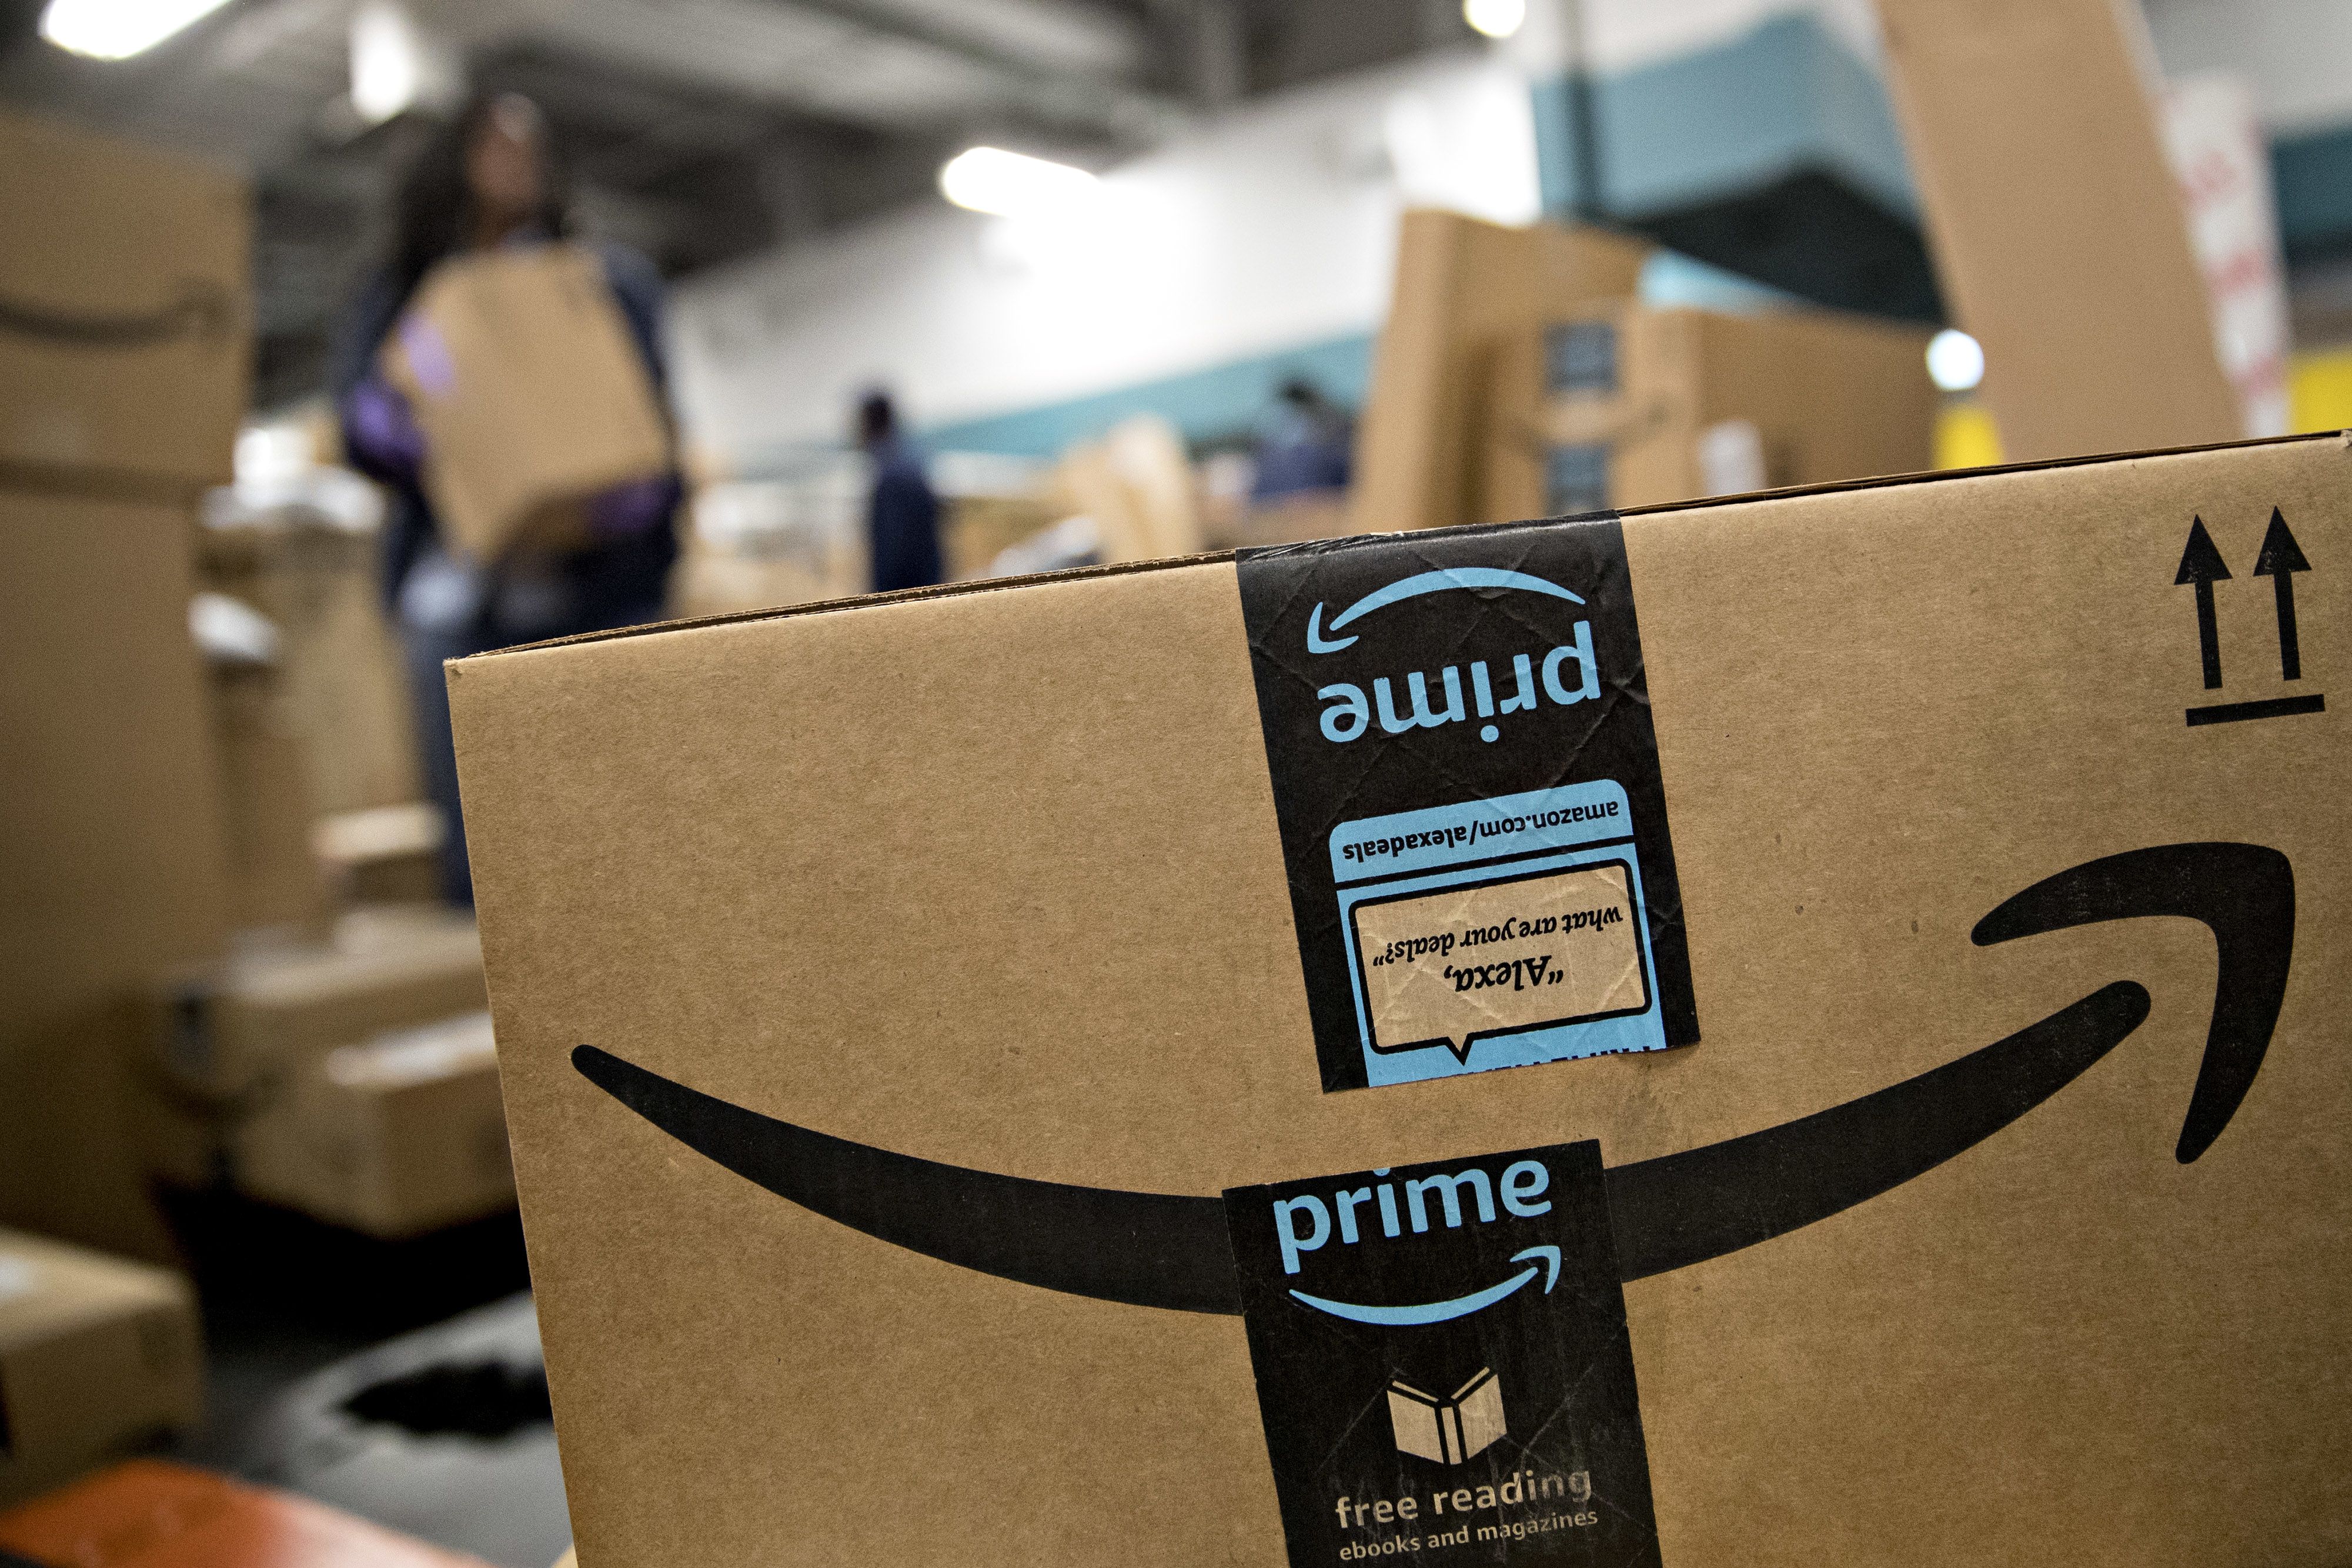 is spending $800 million to make free one-day shipping